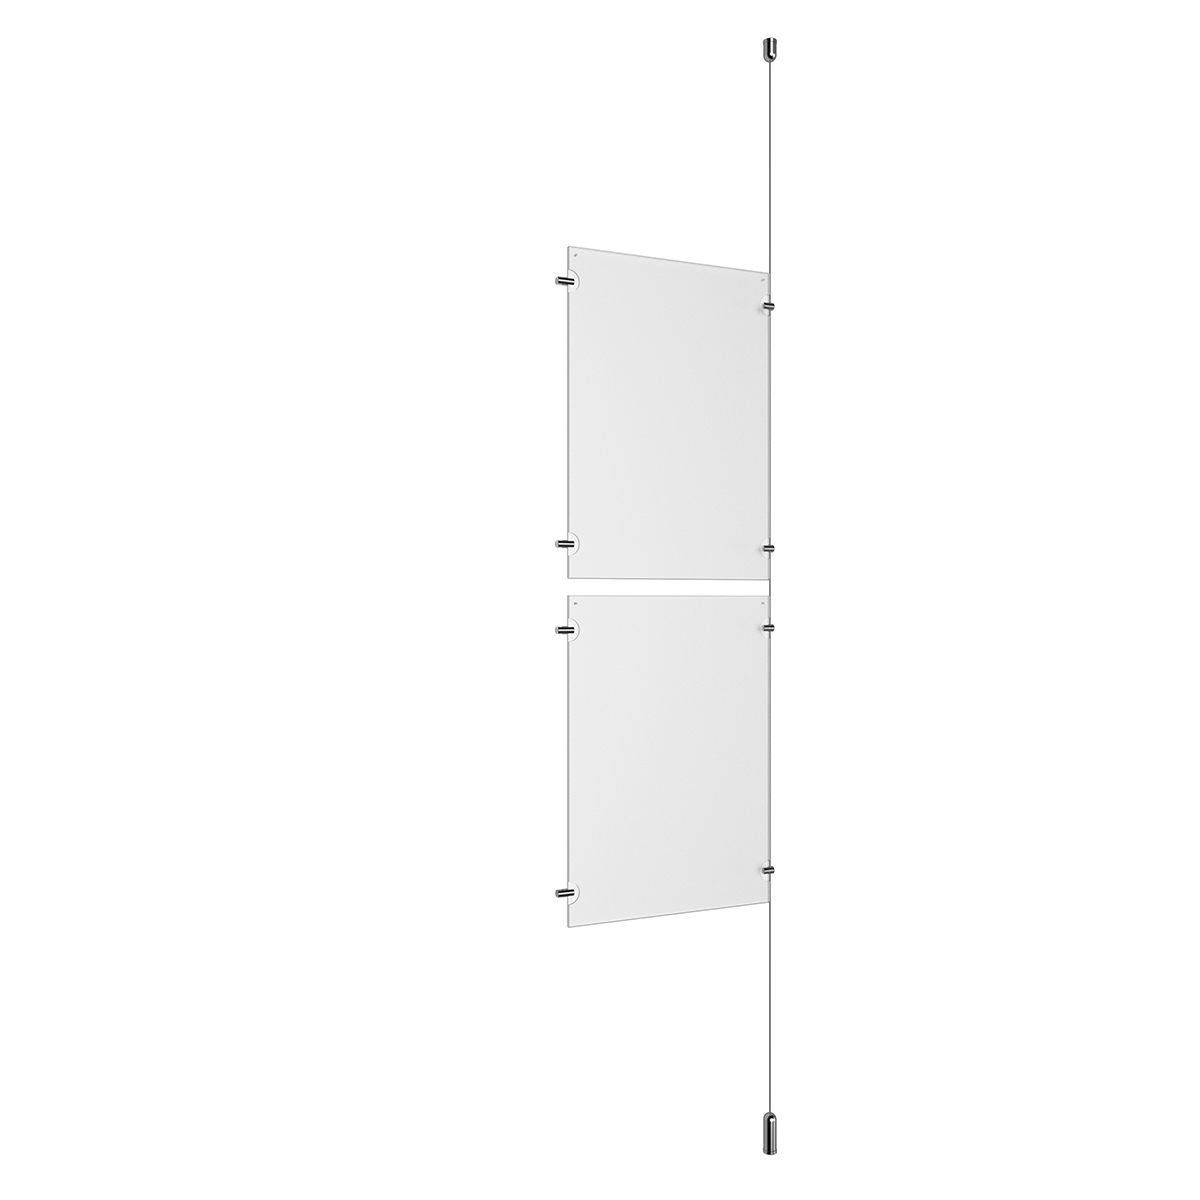 (2) 11'' Width x 17'' Height Clear Acrylic Frame & (1) Ceiling-to-Floor Aluminum Clear Anodized Cable Systems with (4) Single-Sided Panel Grippers (4) Double-Sided Panel Grippers